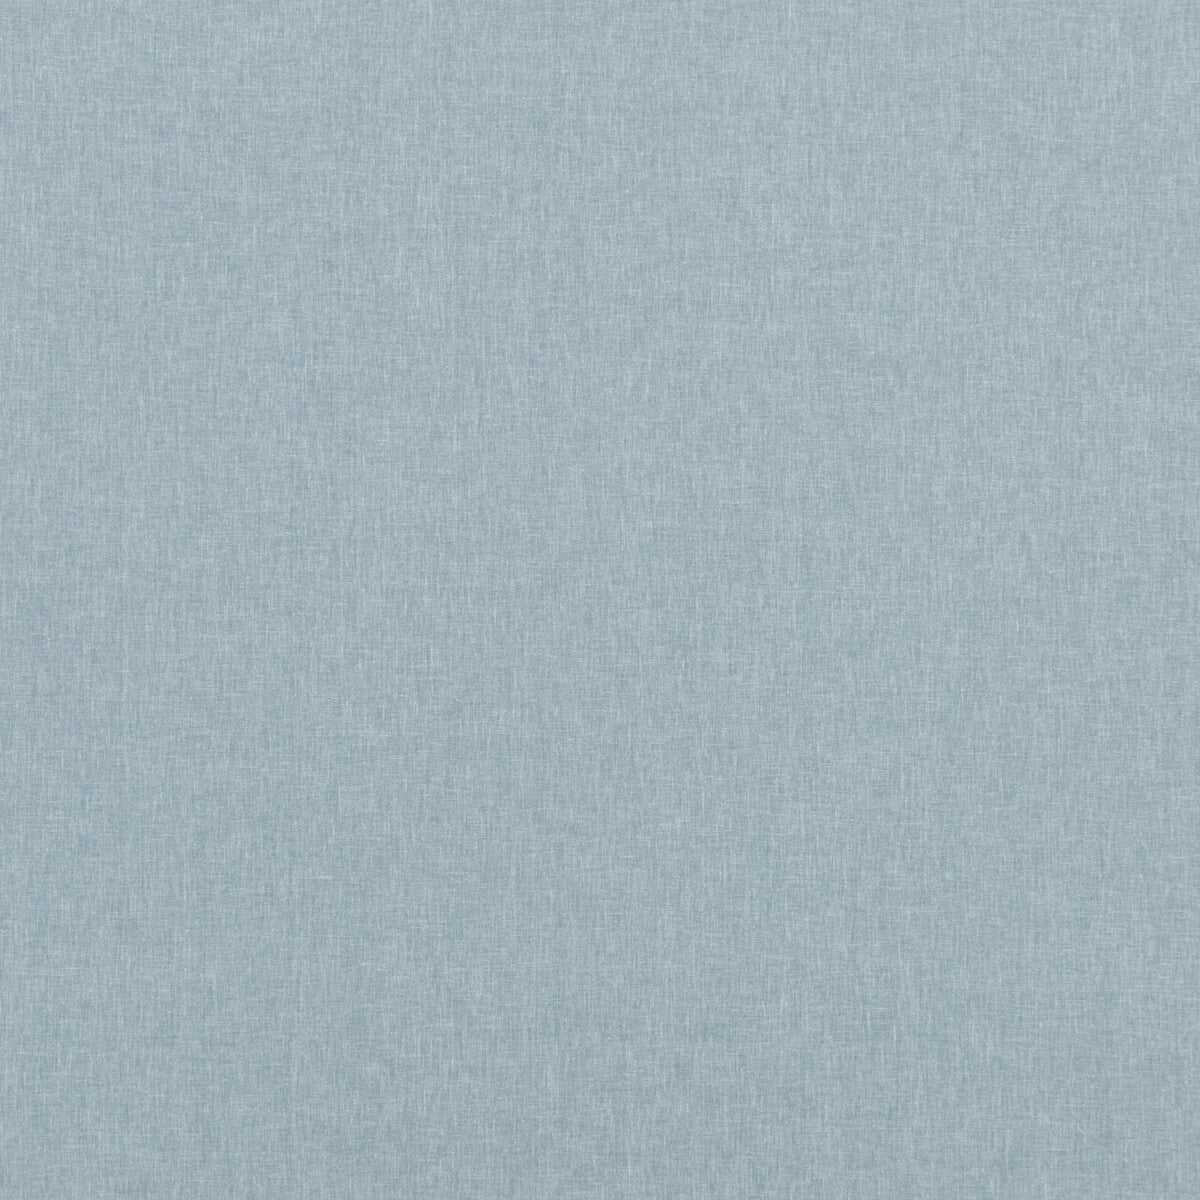 Carnival Plain fabric in ocean color - pattern PF50420.612.0 - by Baker Lifestyle in the Carnival collection